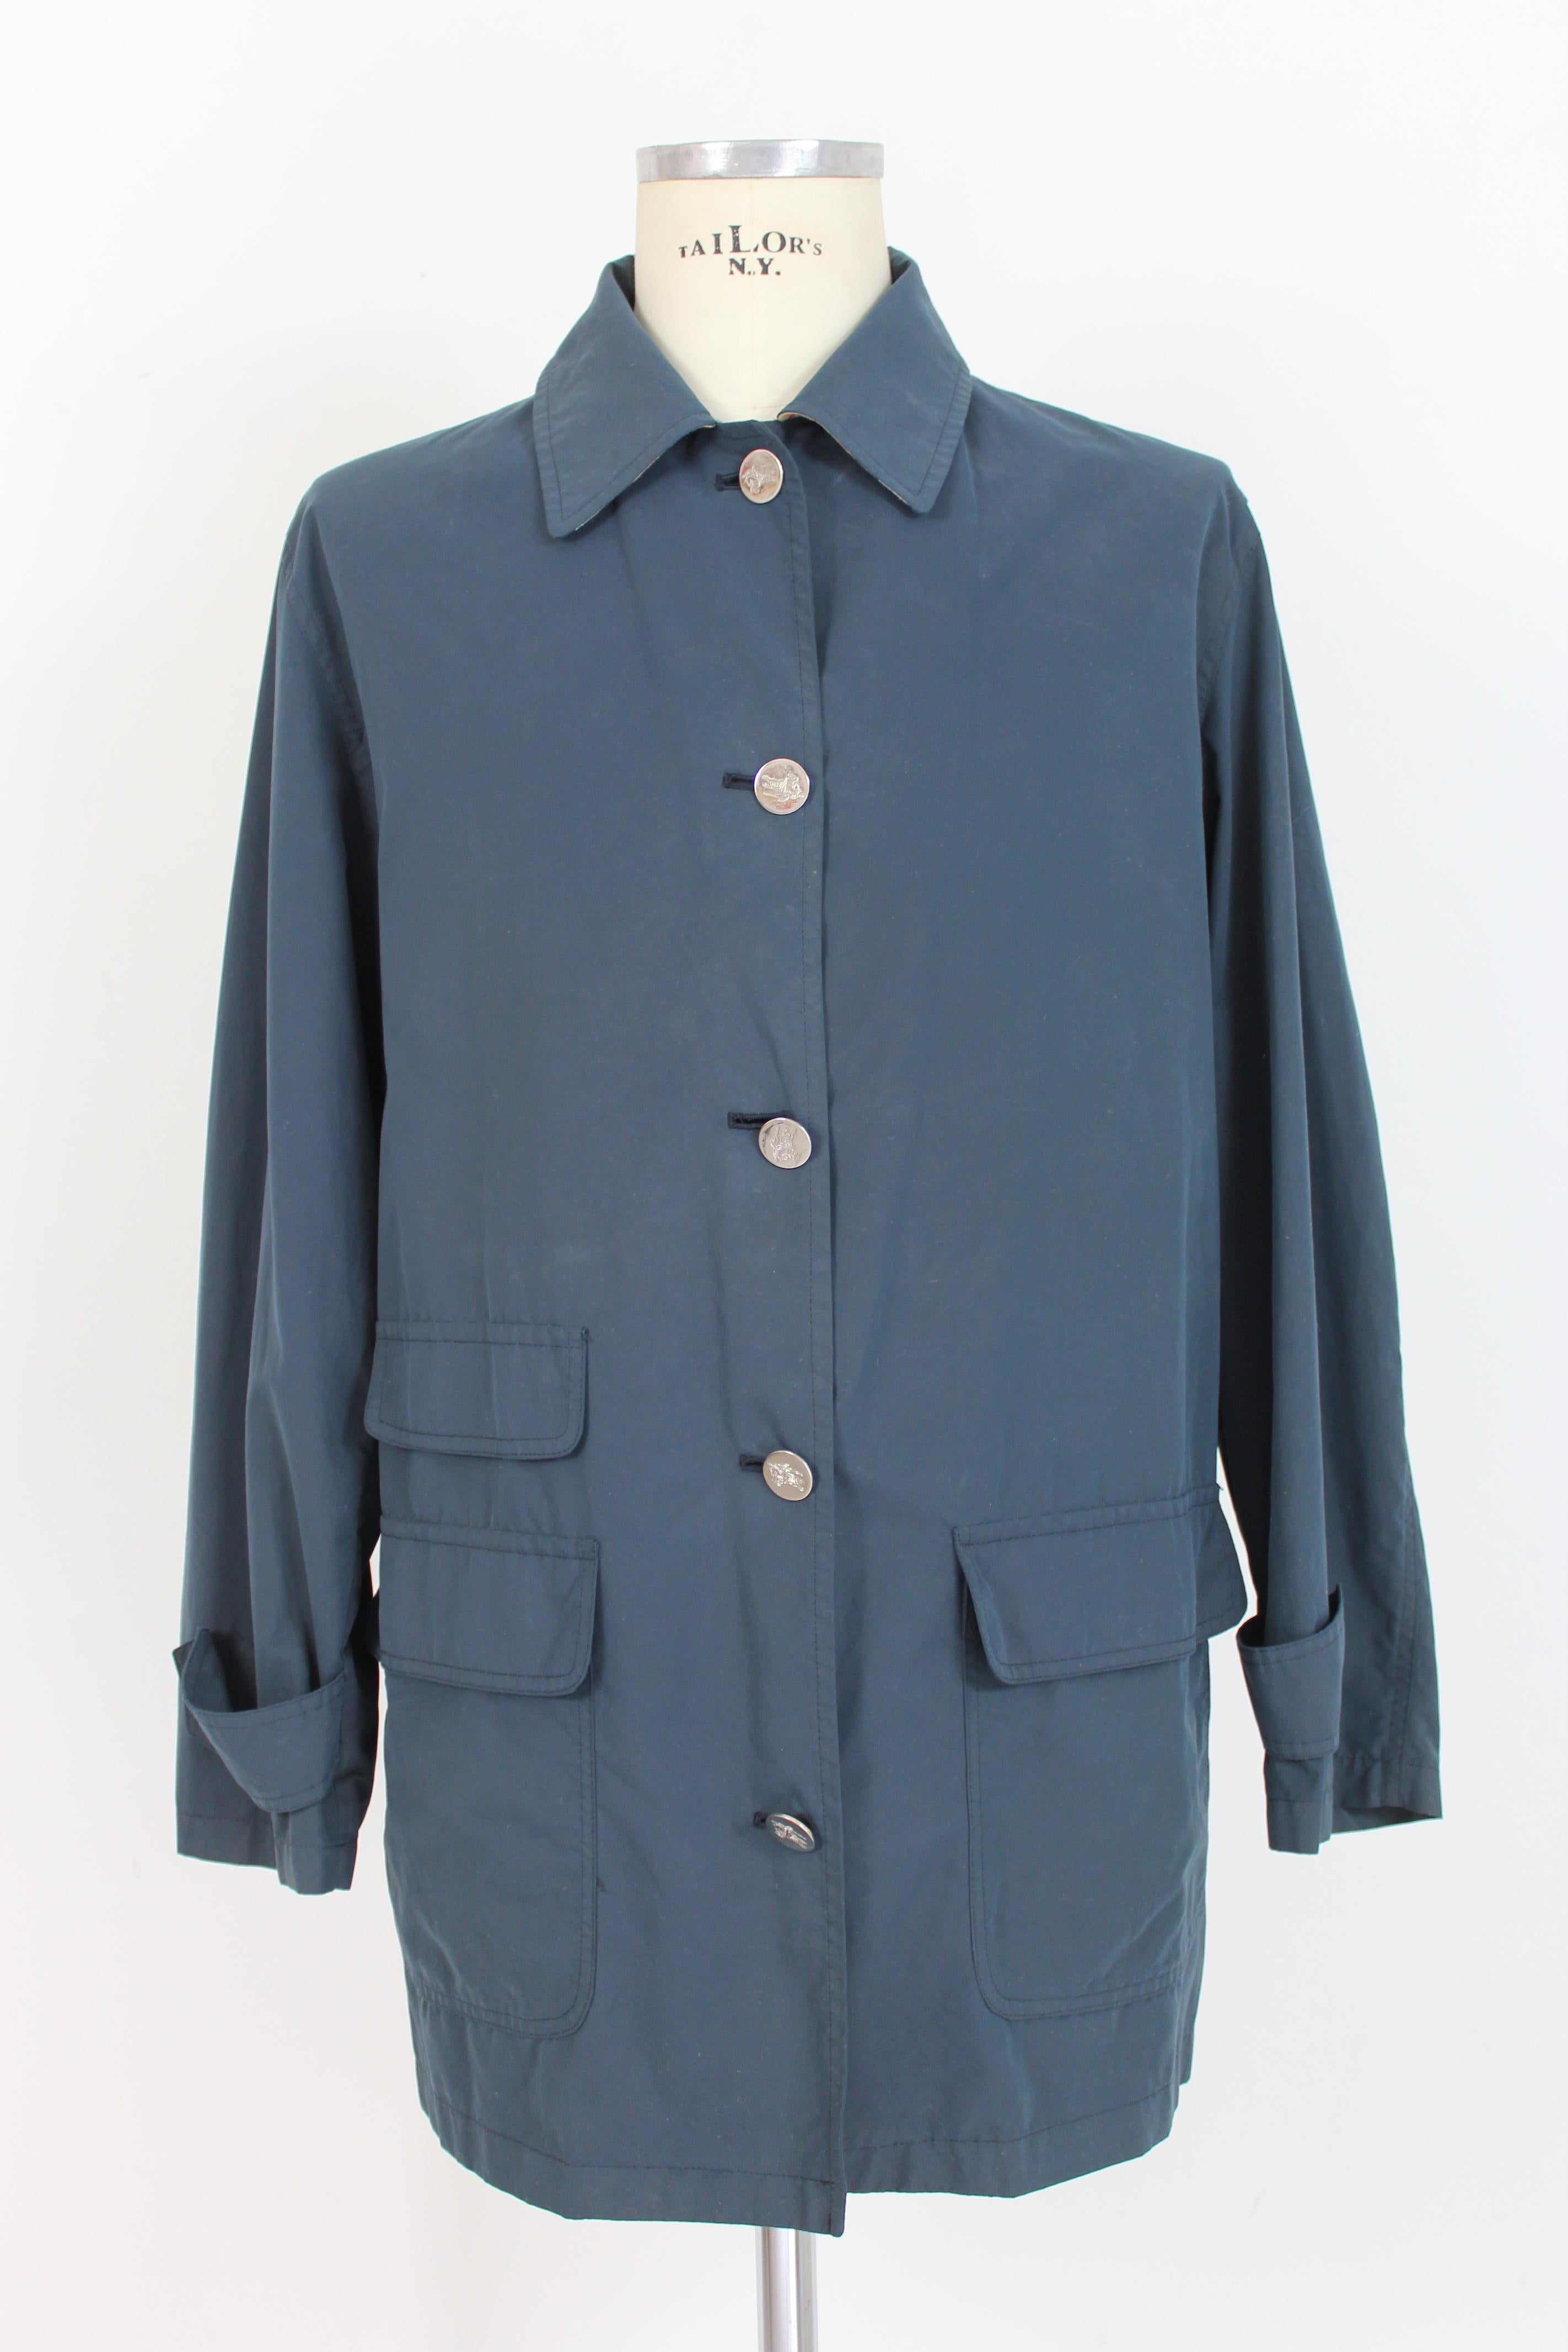 Burberry men's vintage 80s raincoat. Long jacket, blue color, closure with silver buttons. Fabric 59% polyamide, 34% cotton, 7% polyurethane. Made in Italy. Excellent vintage condition.

Size: 44 It 34 Us 34 Uk

Shoulder: 46 cm
Bust / Chest: 60